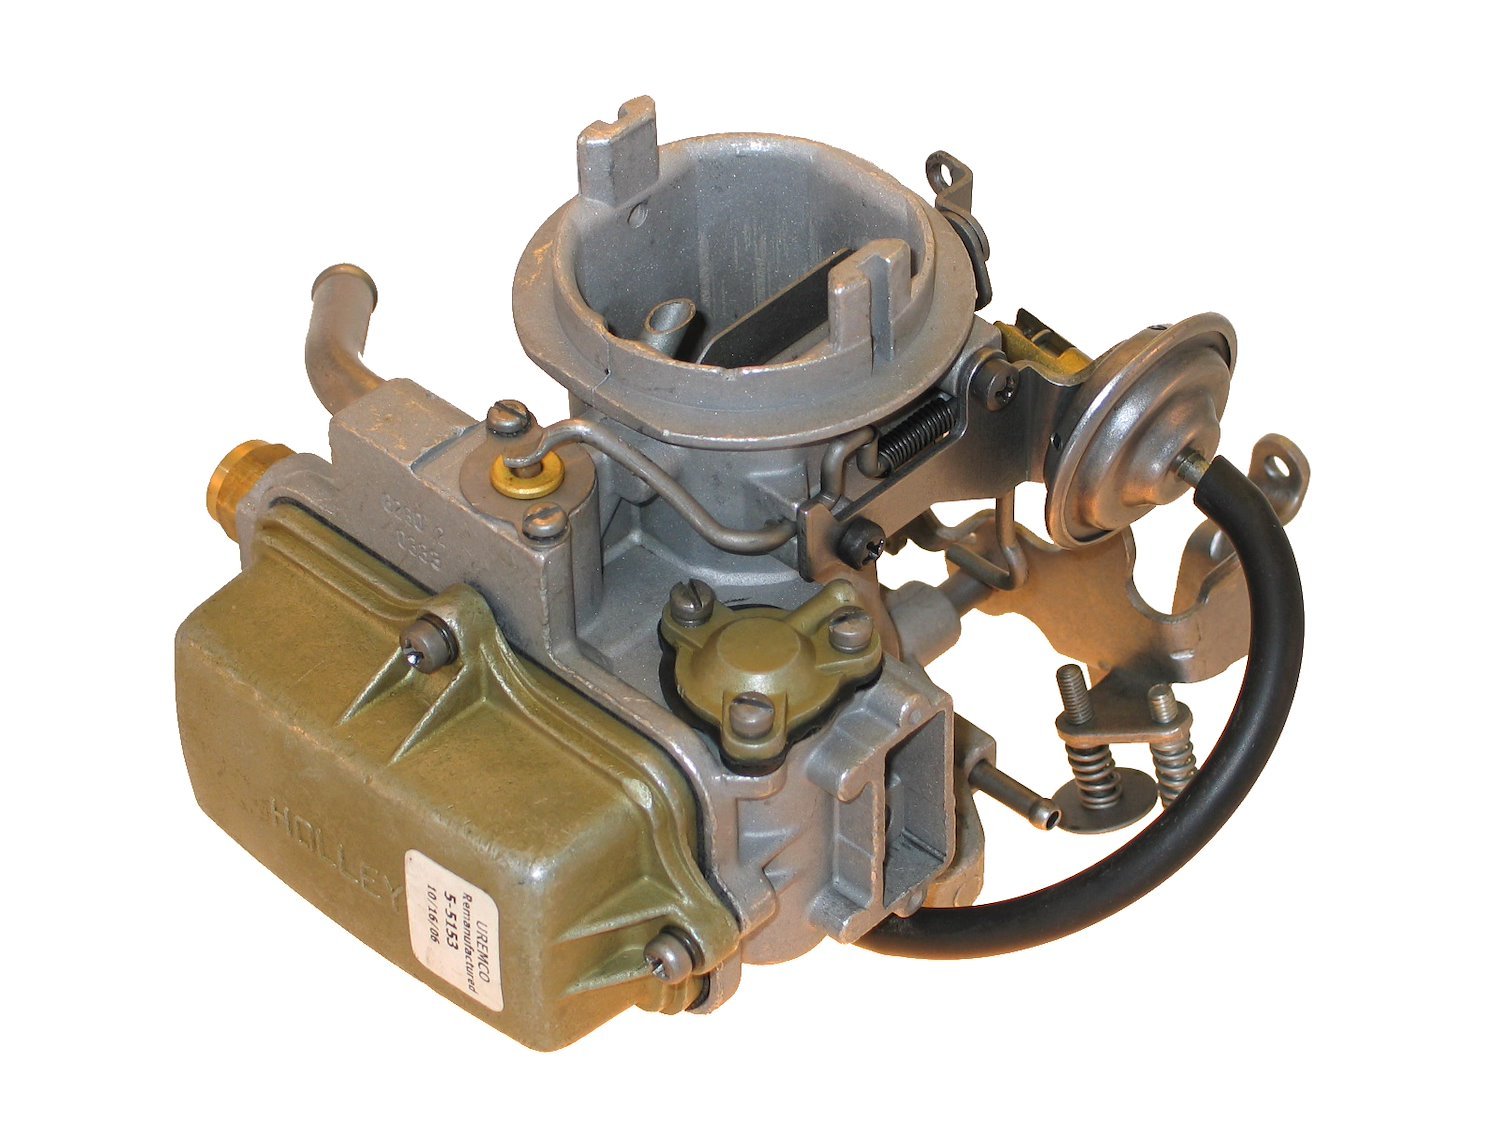 7-782 Holley Remanufactured Carburetor, 1920-Style